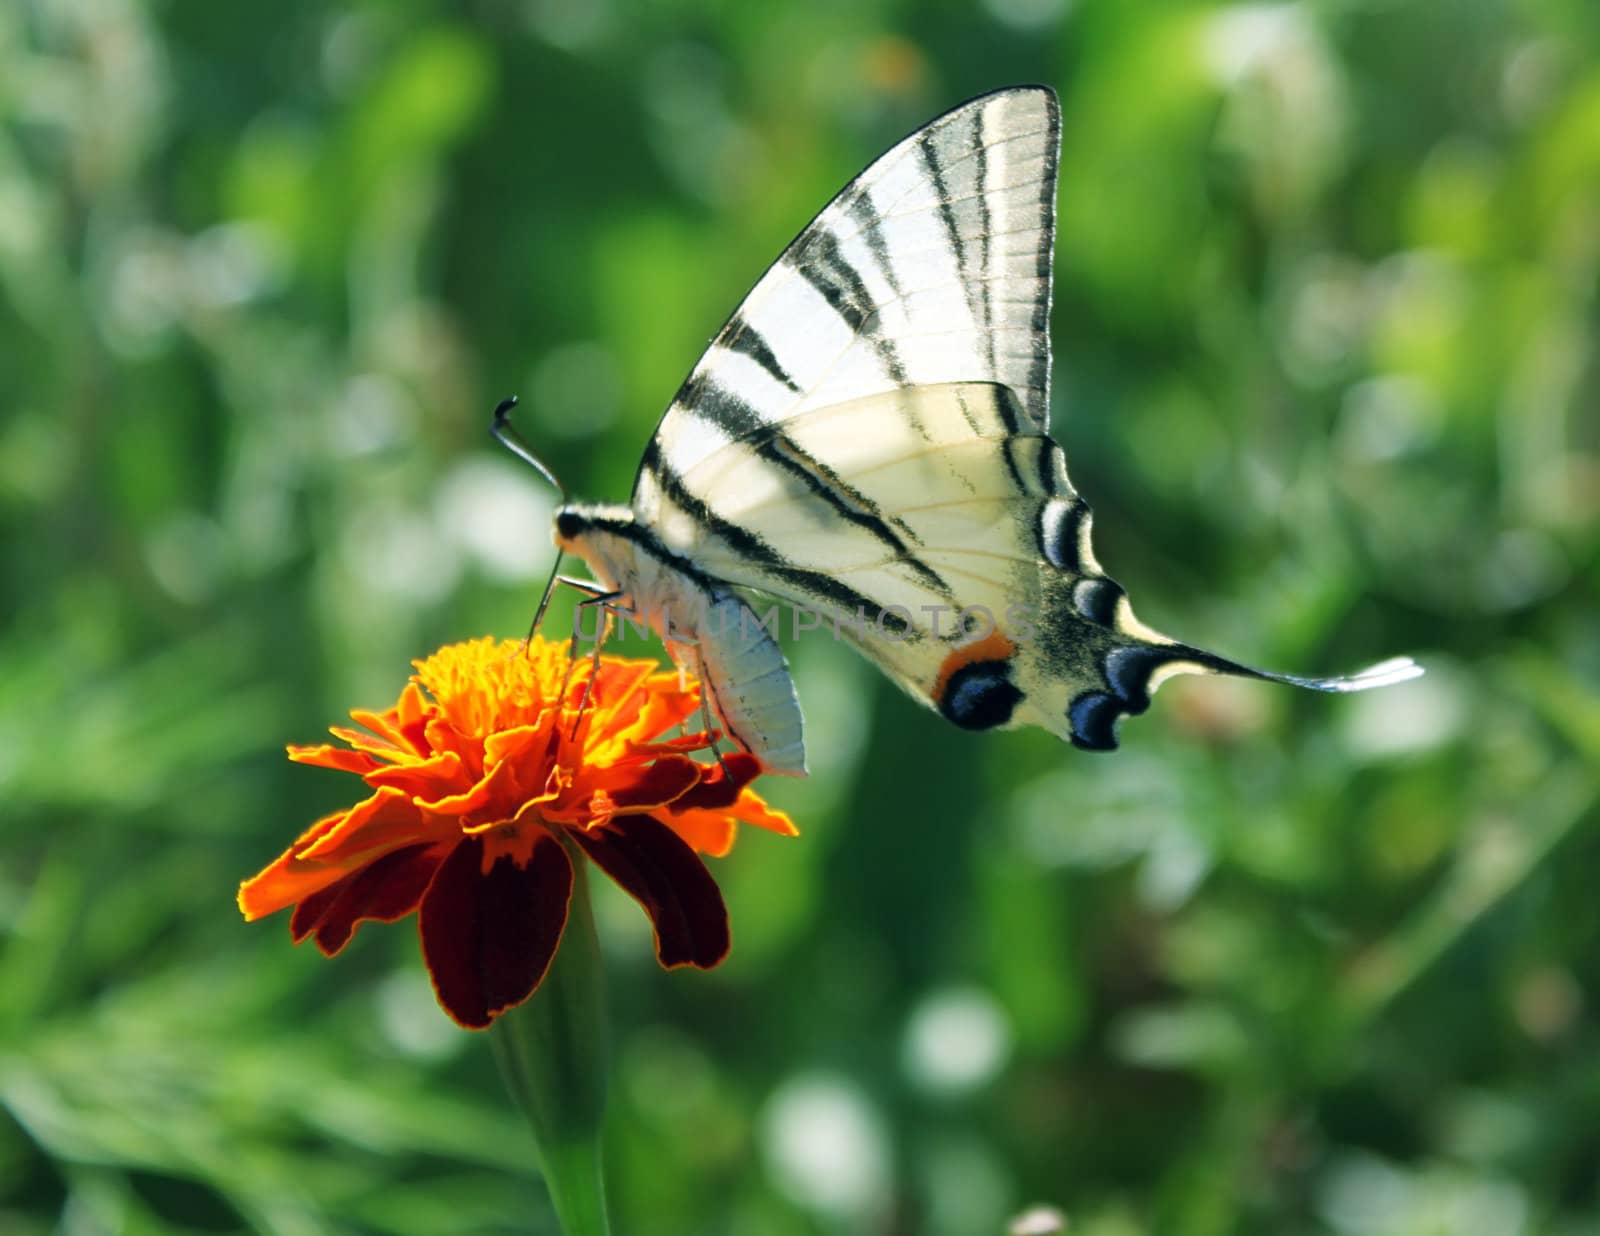 butterfly (Scarce Swallowtail) with opened wings on a flower